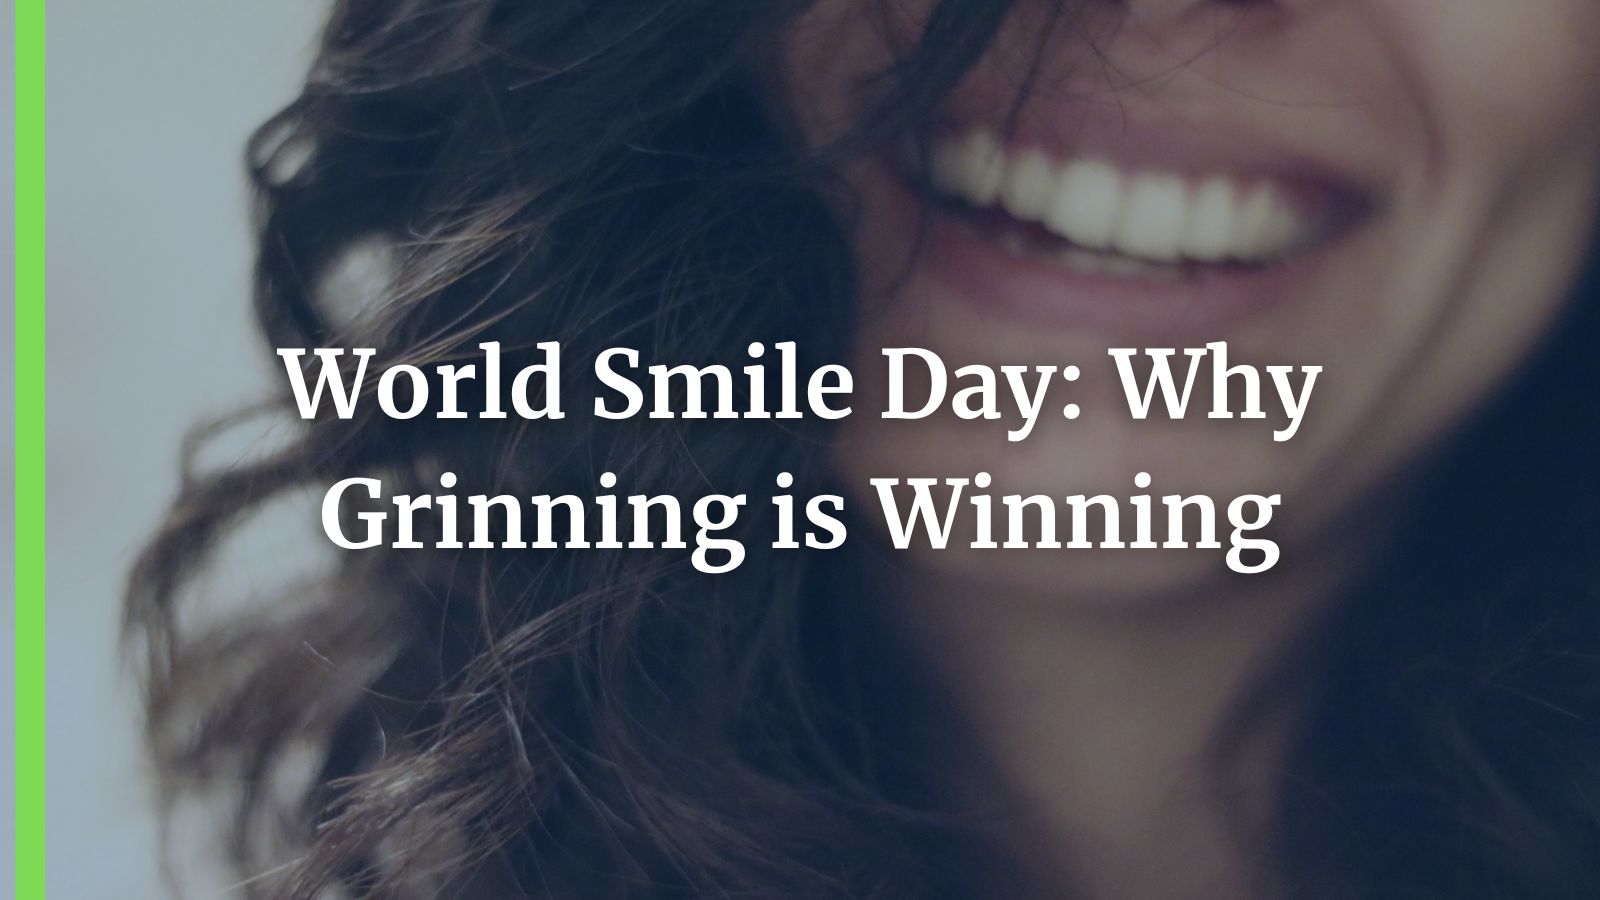 World Smile Day: Why Grinning is Winning